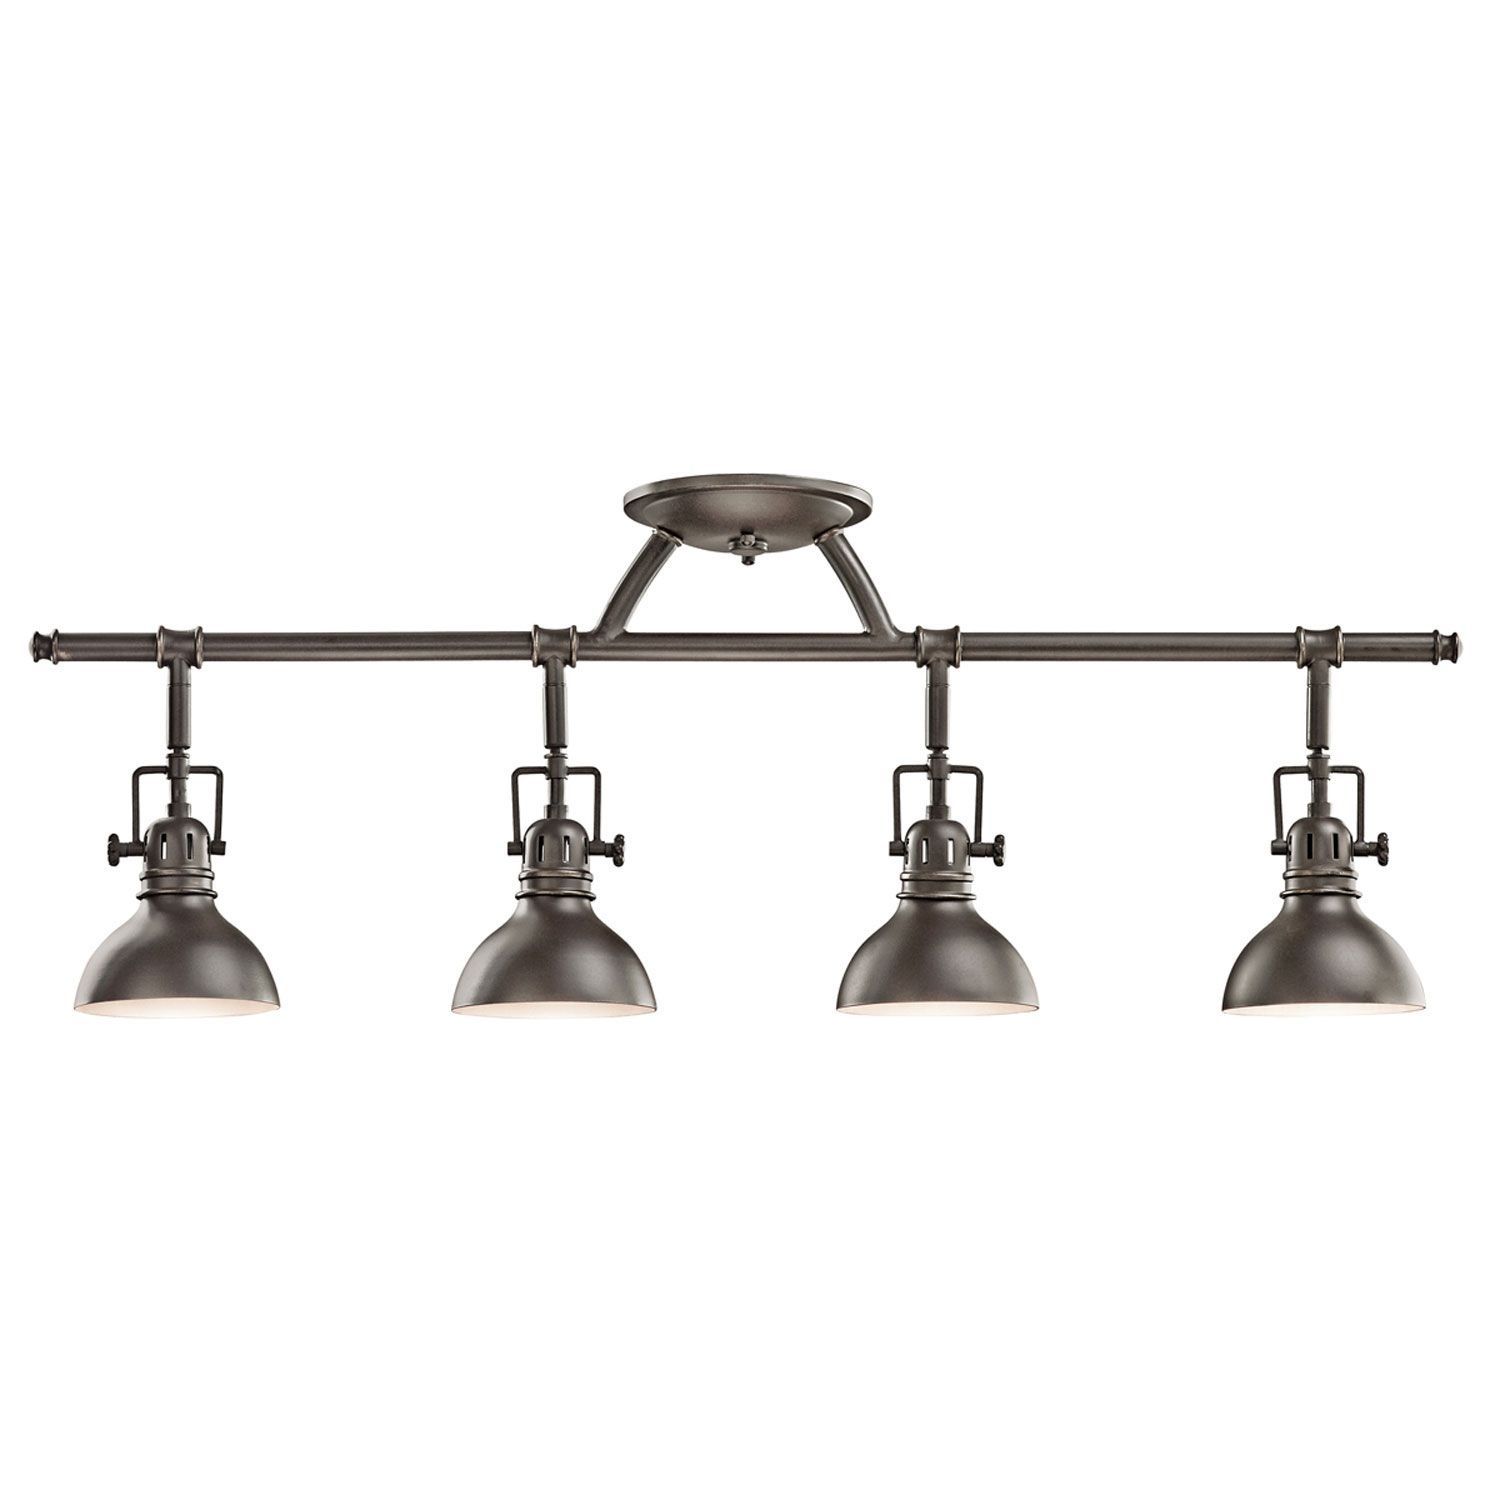 Kichler Olde Bronze Four Light Fixed Rail | Track Lighting Fixtures Intended For Outdoor Directional Ceiling Lights (View 5 of 15)